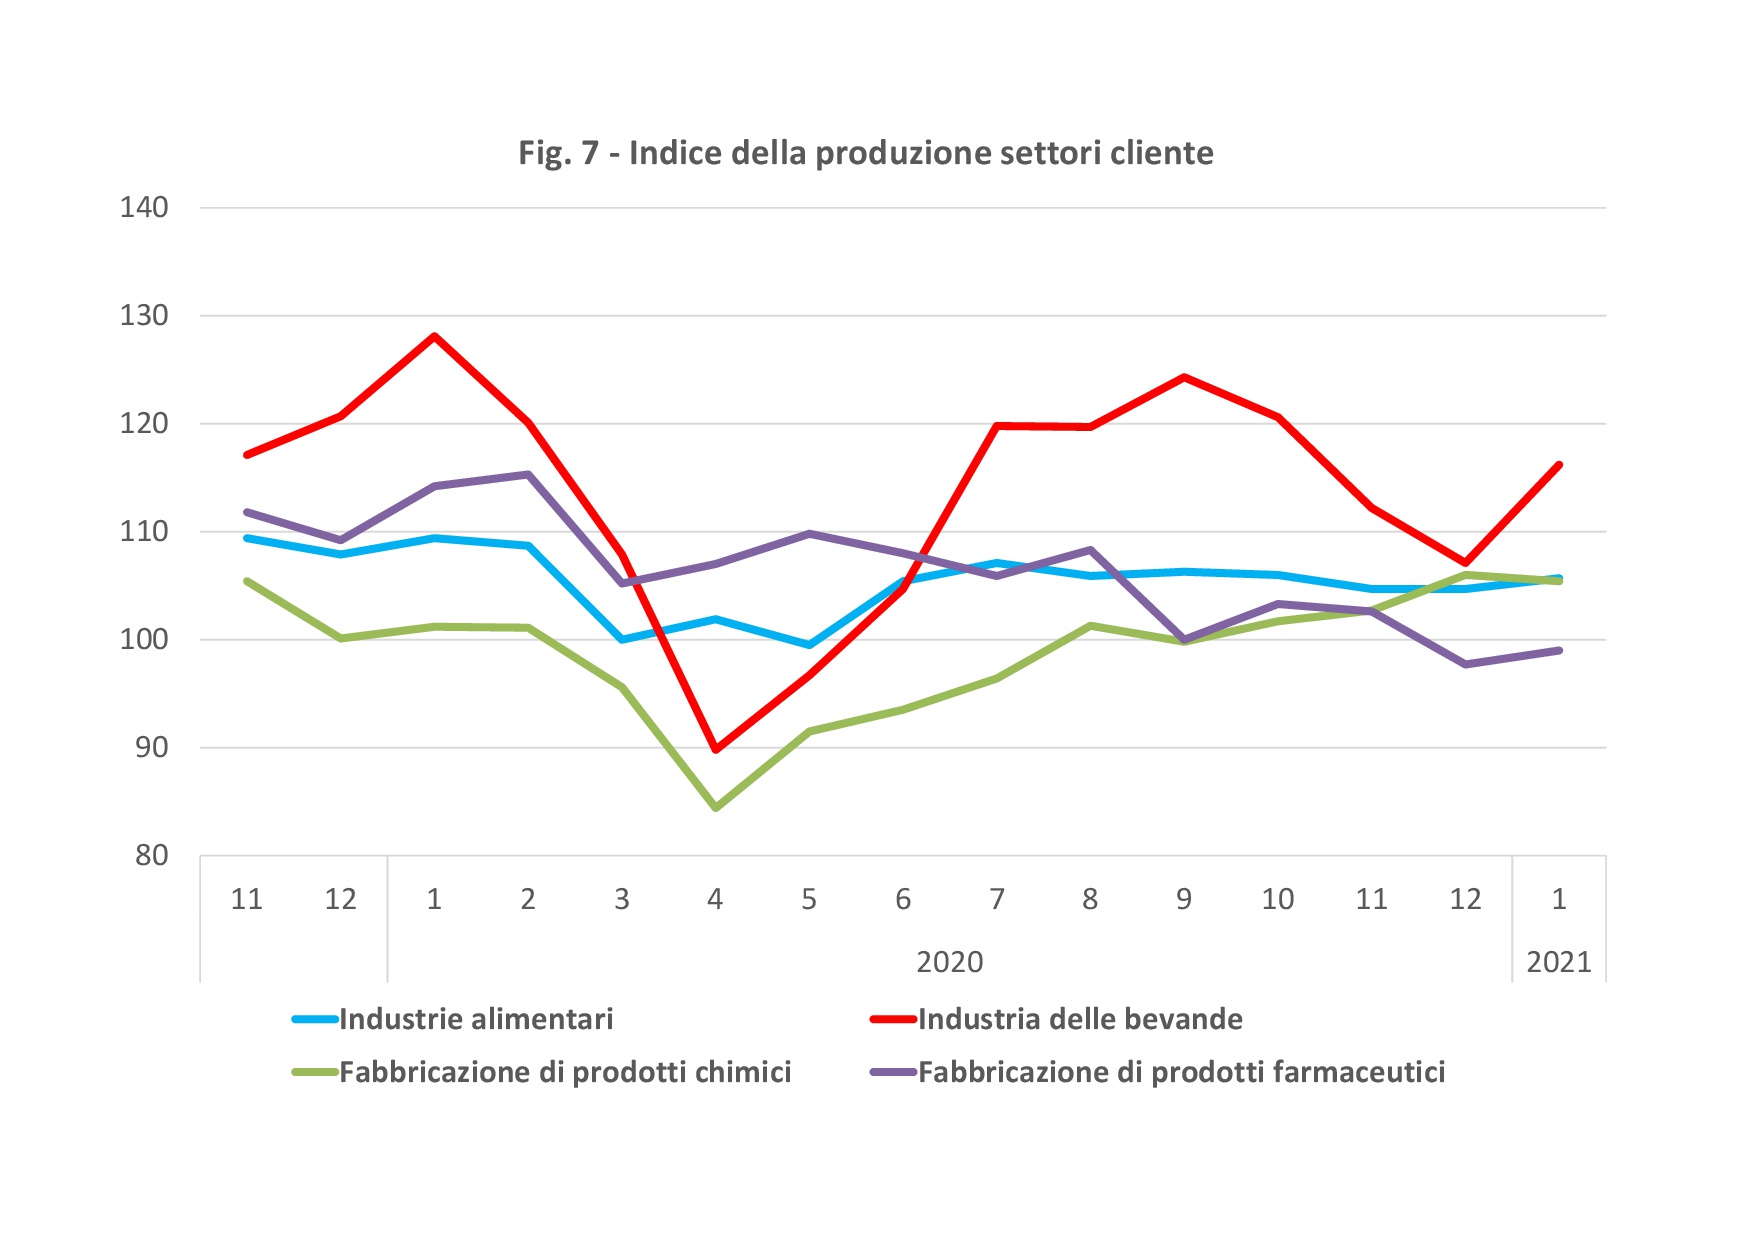 Sectoral indices of Italian Packaging Production by Food, Bevergae, Chemicals and Pharma